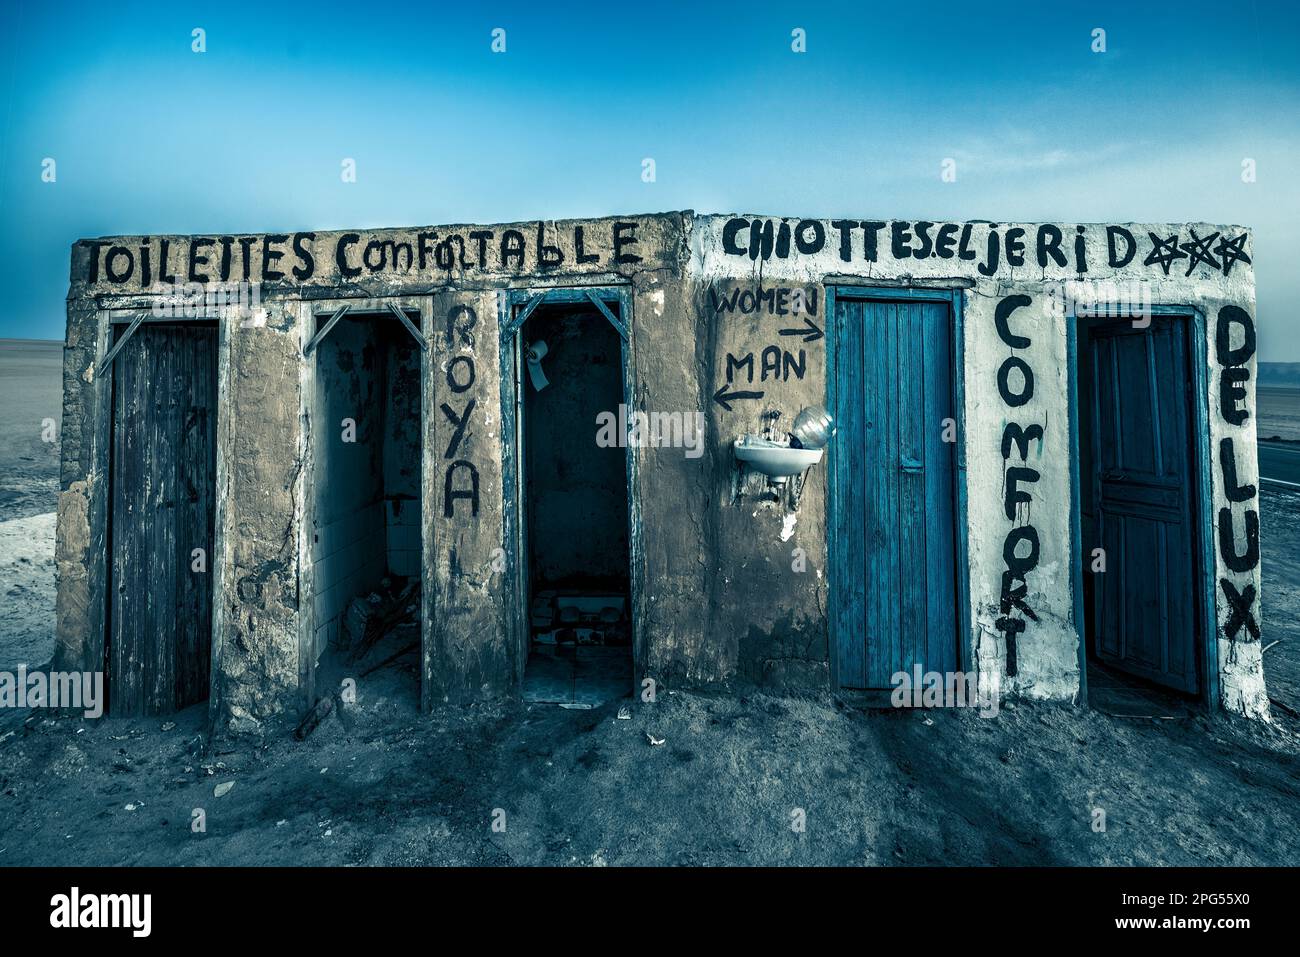 This haunting photograph captures the stark contrast between the decrepit state of a restroom in the Tunisian desert and the luxurious descriptions sc Stock Photo